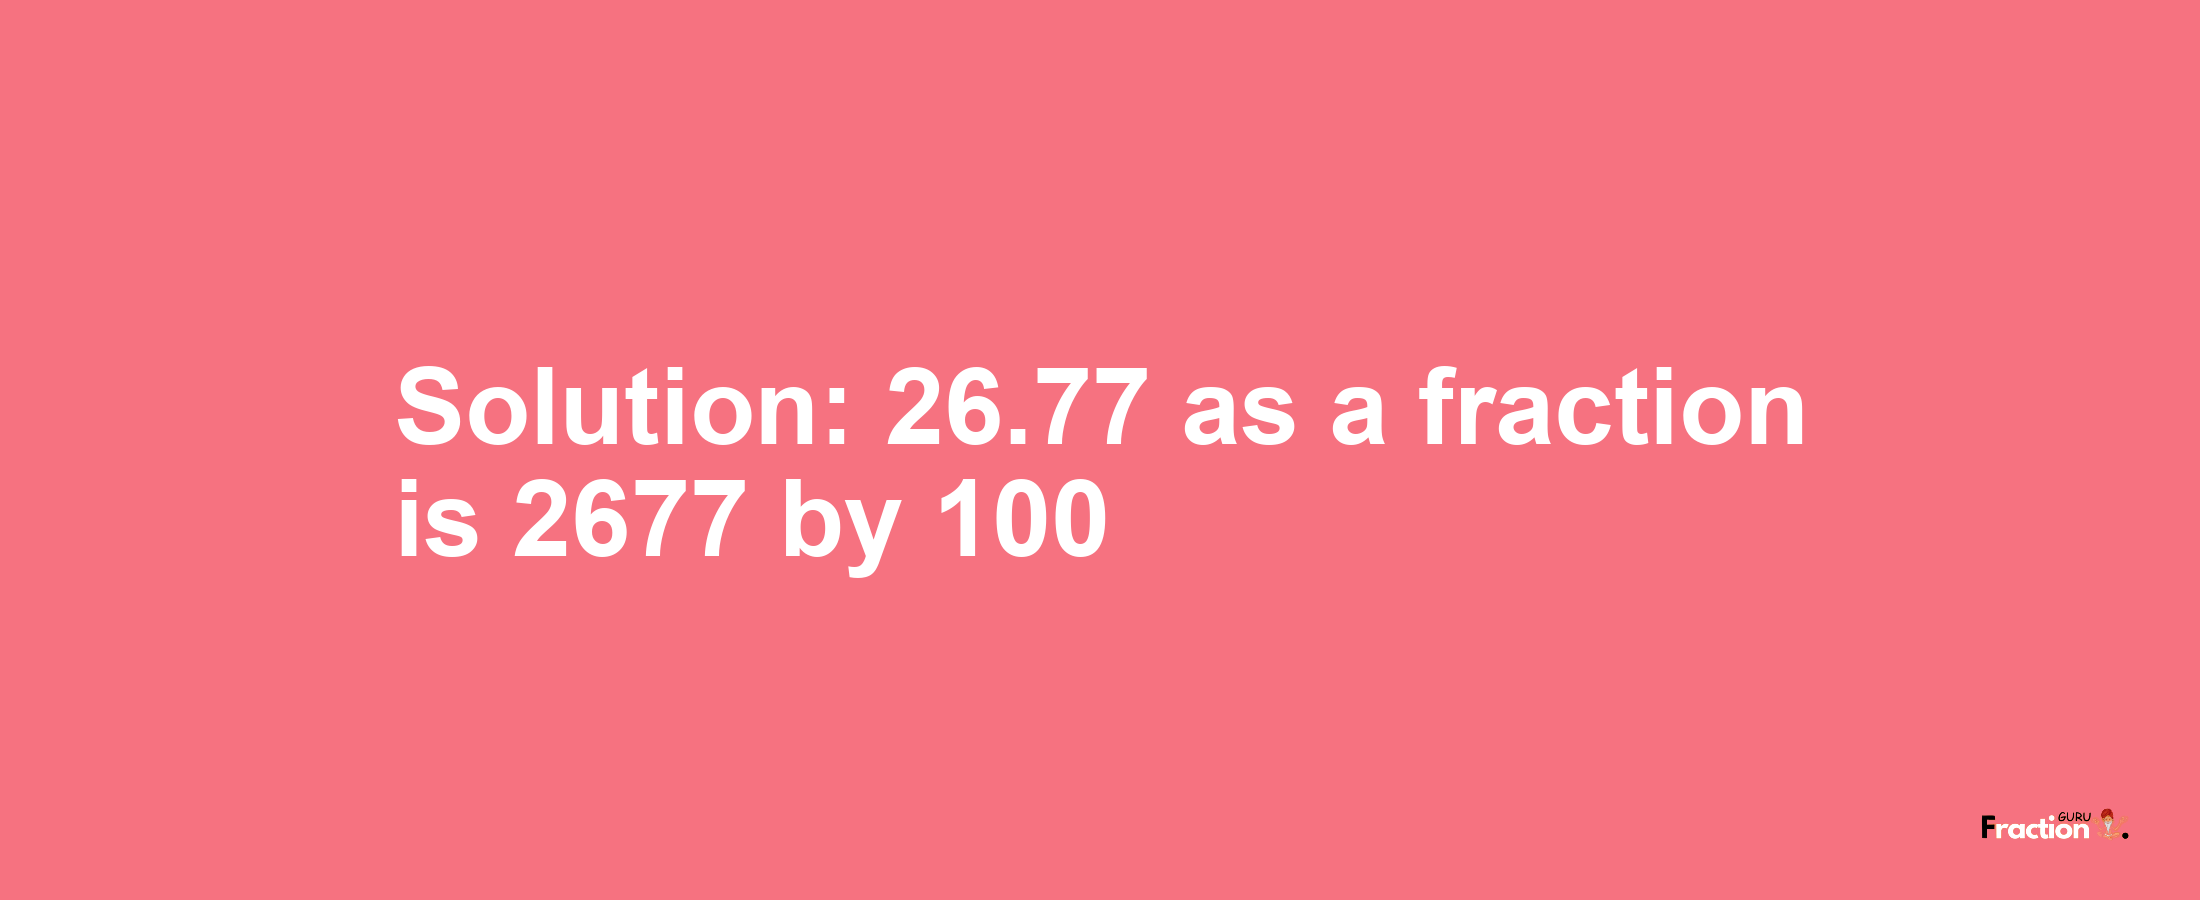 Solution:26.77 as a fraction is 2677/100